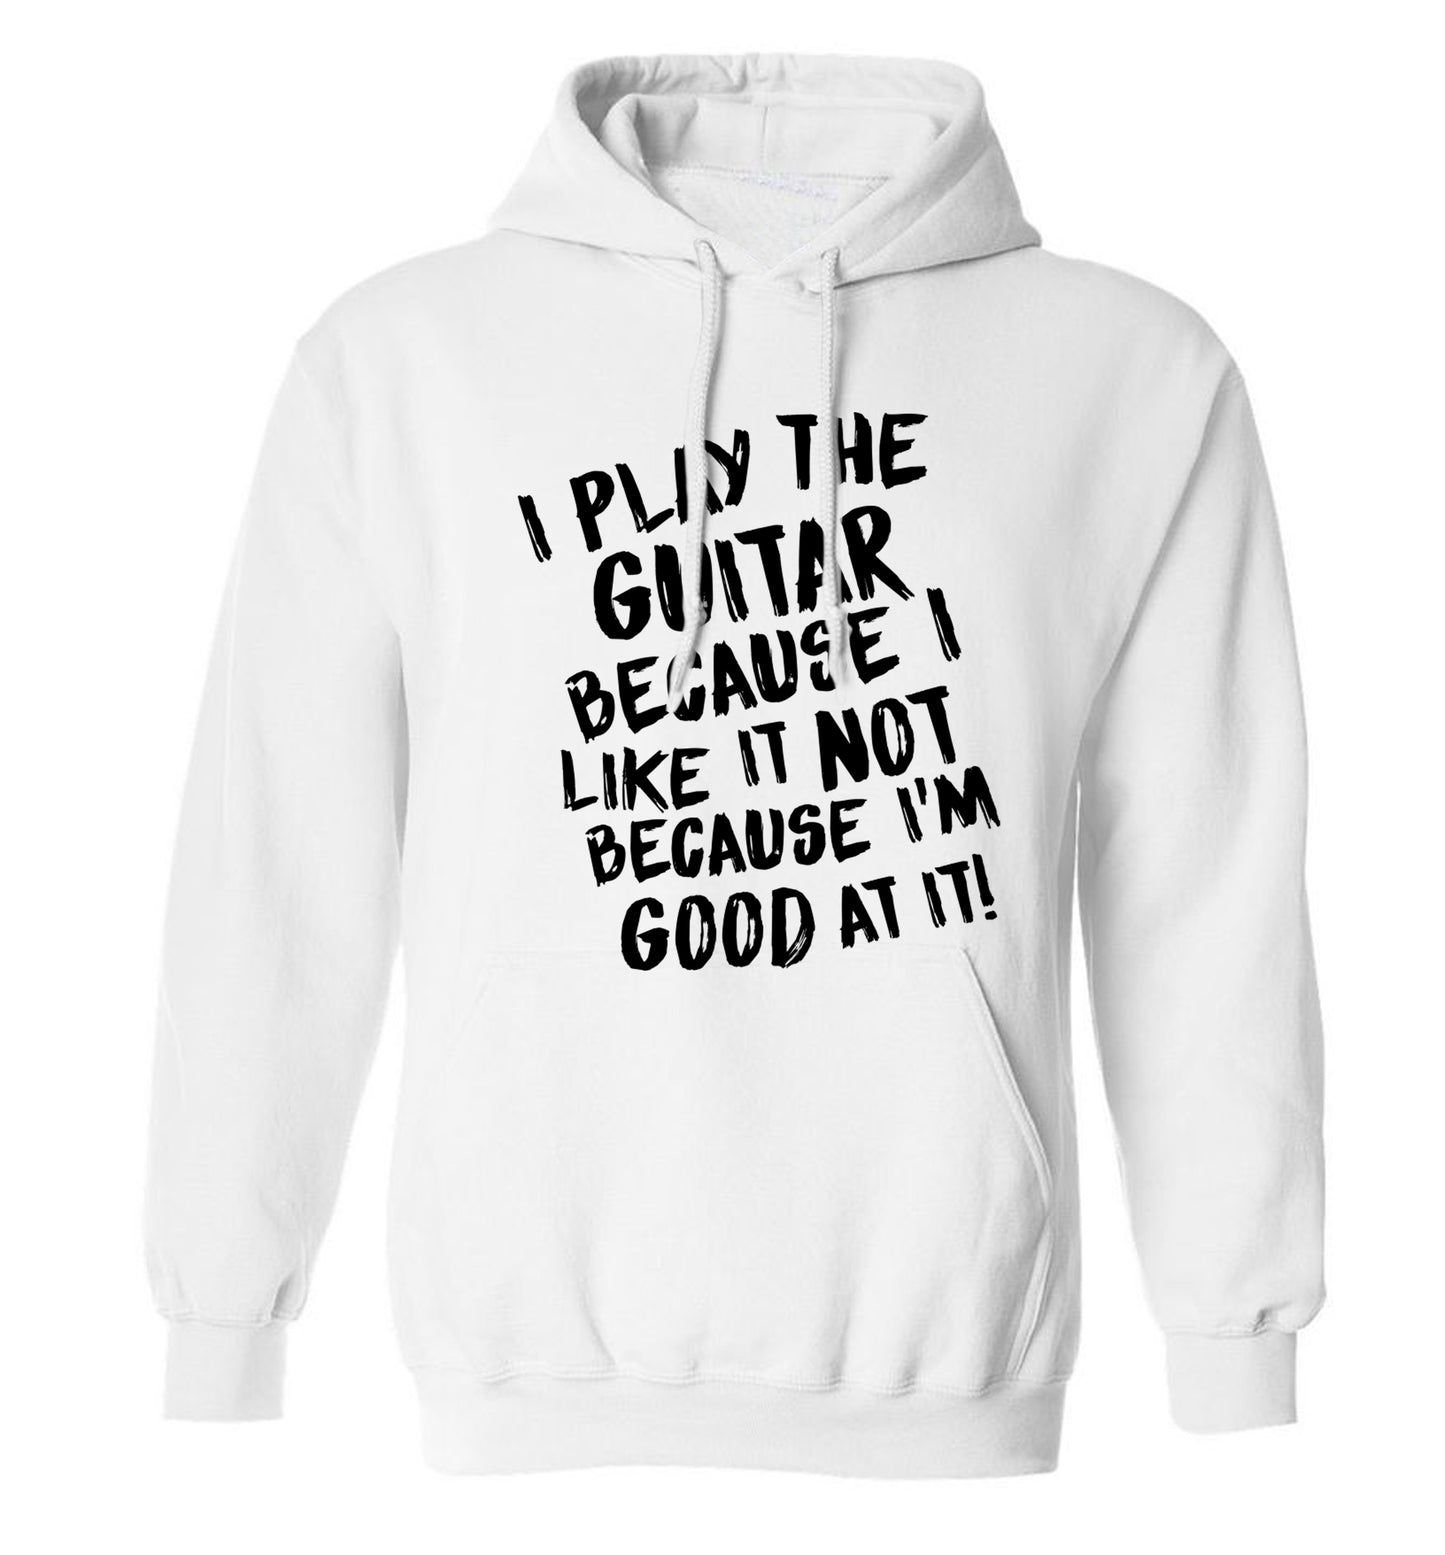 I play the guitar because I like it not because I'm good at it adults unisex white hoodie 2XL